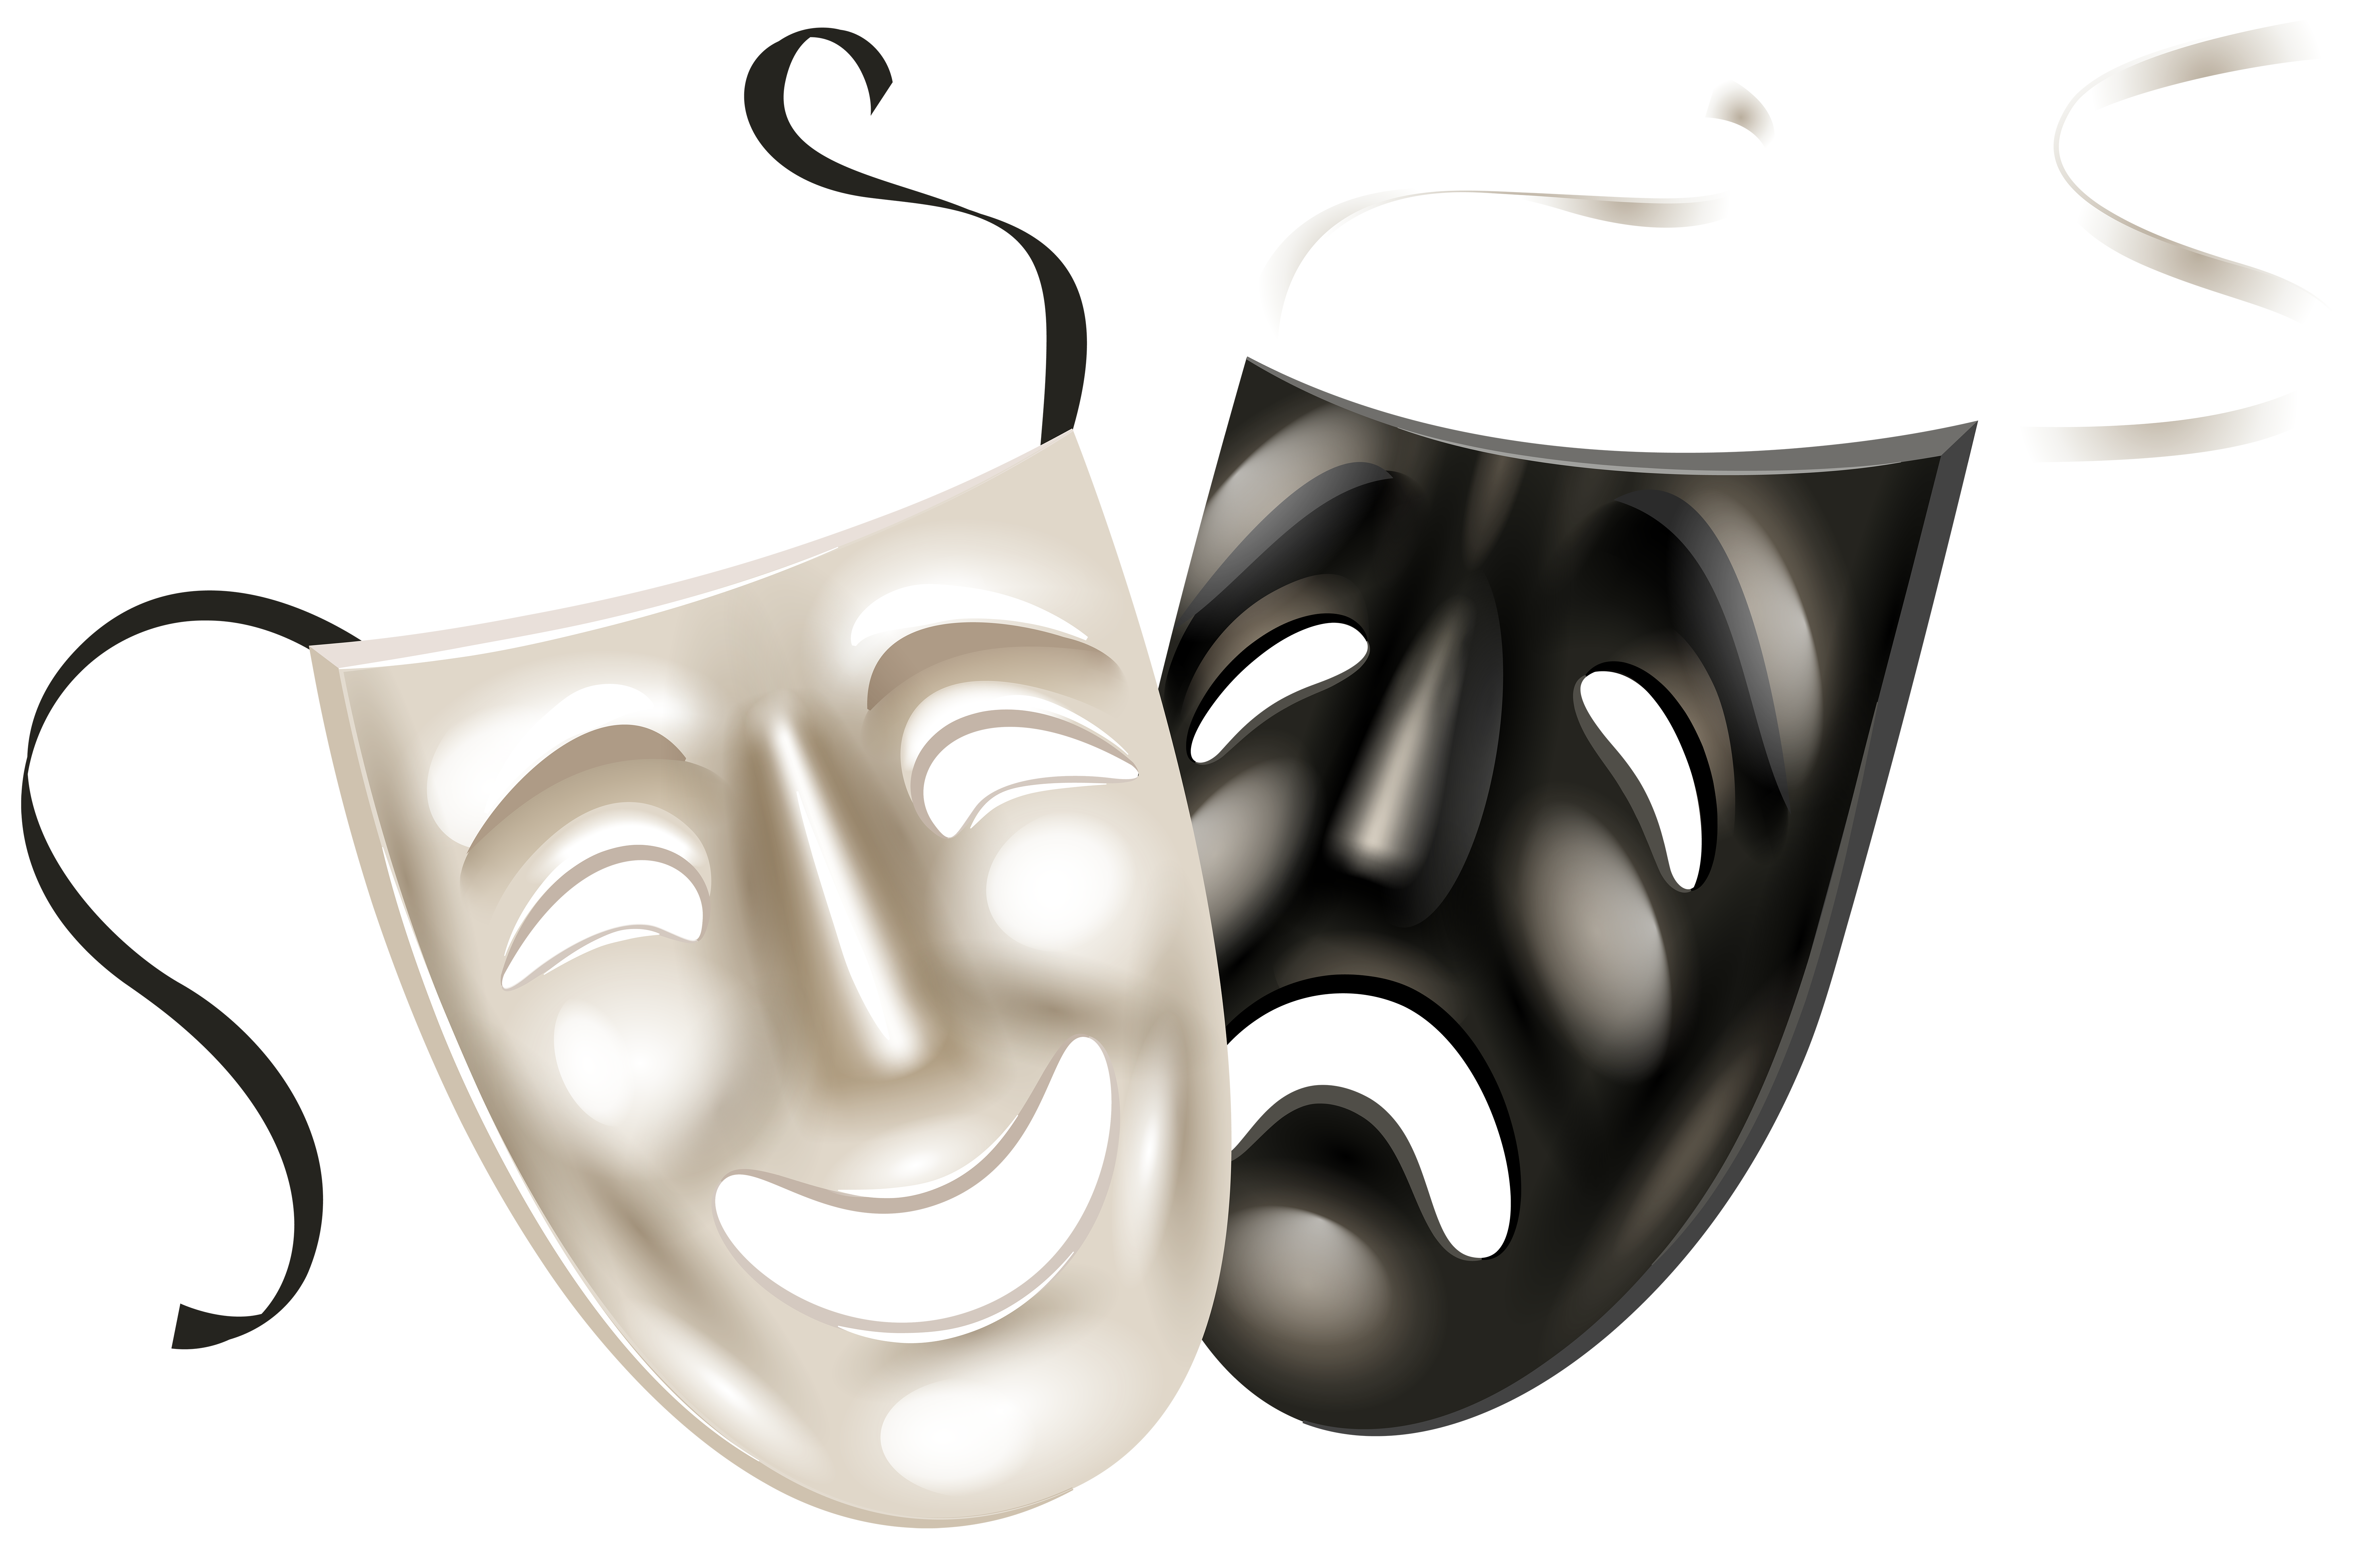 Theater Masks PNG Clip Art PNG Image